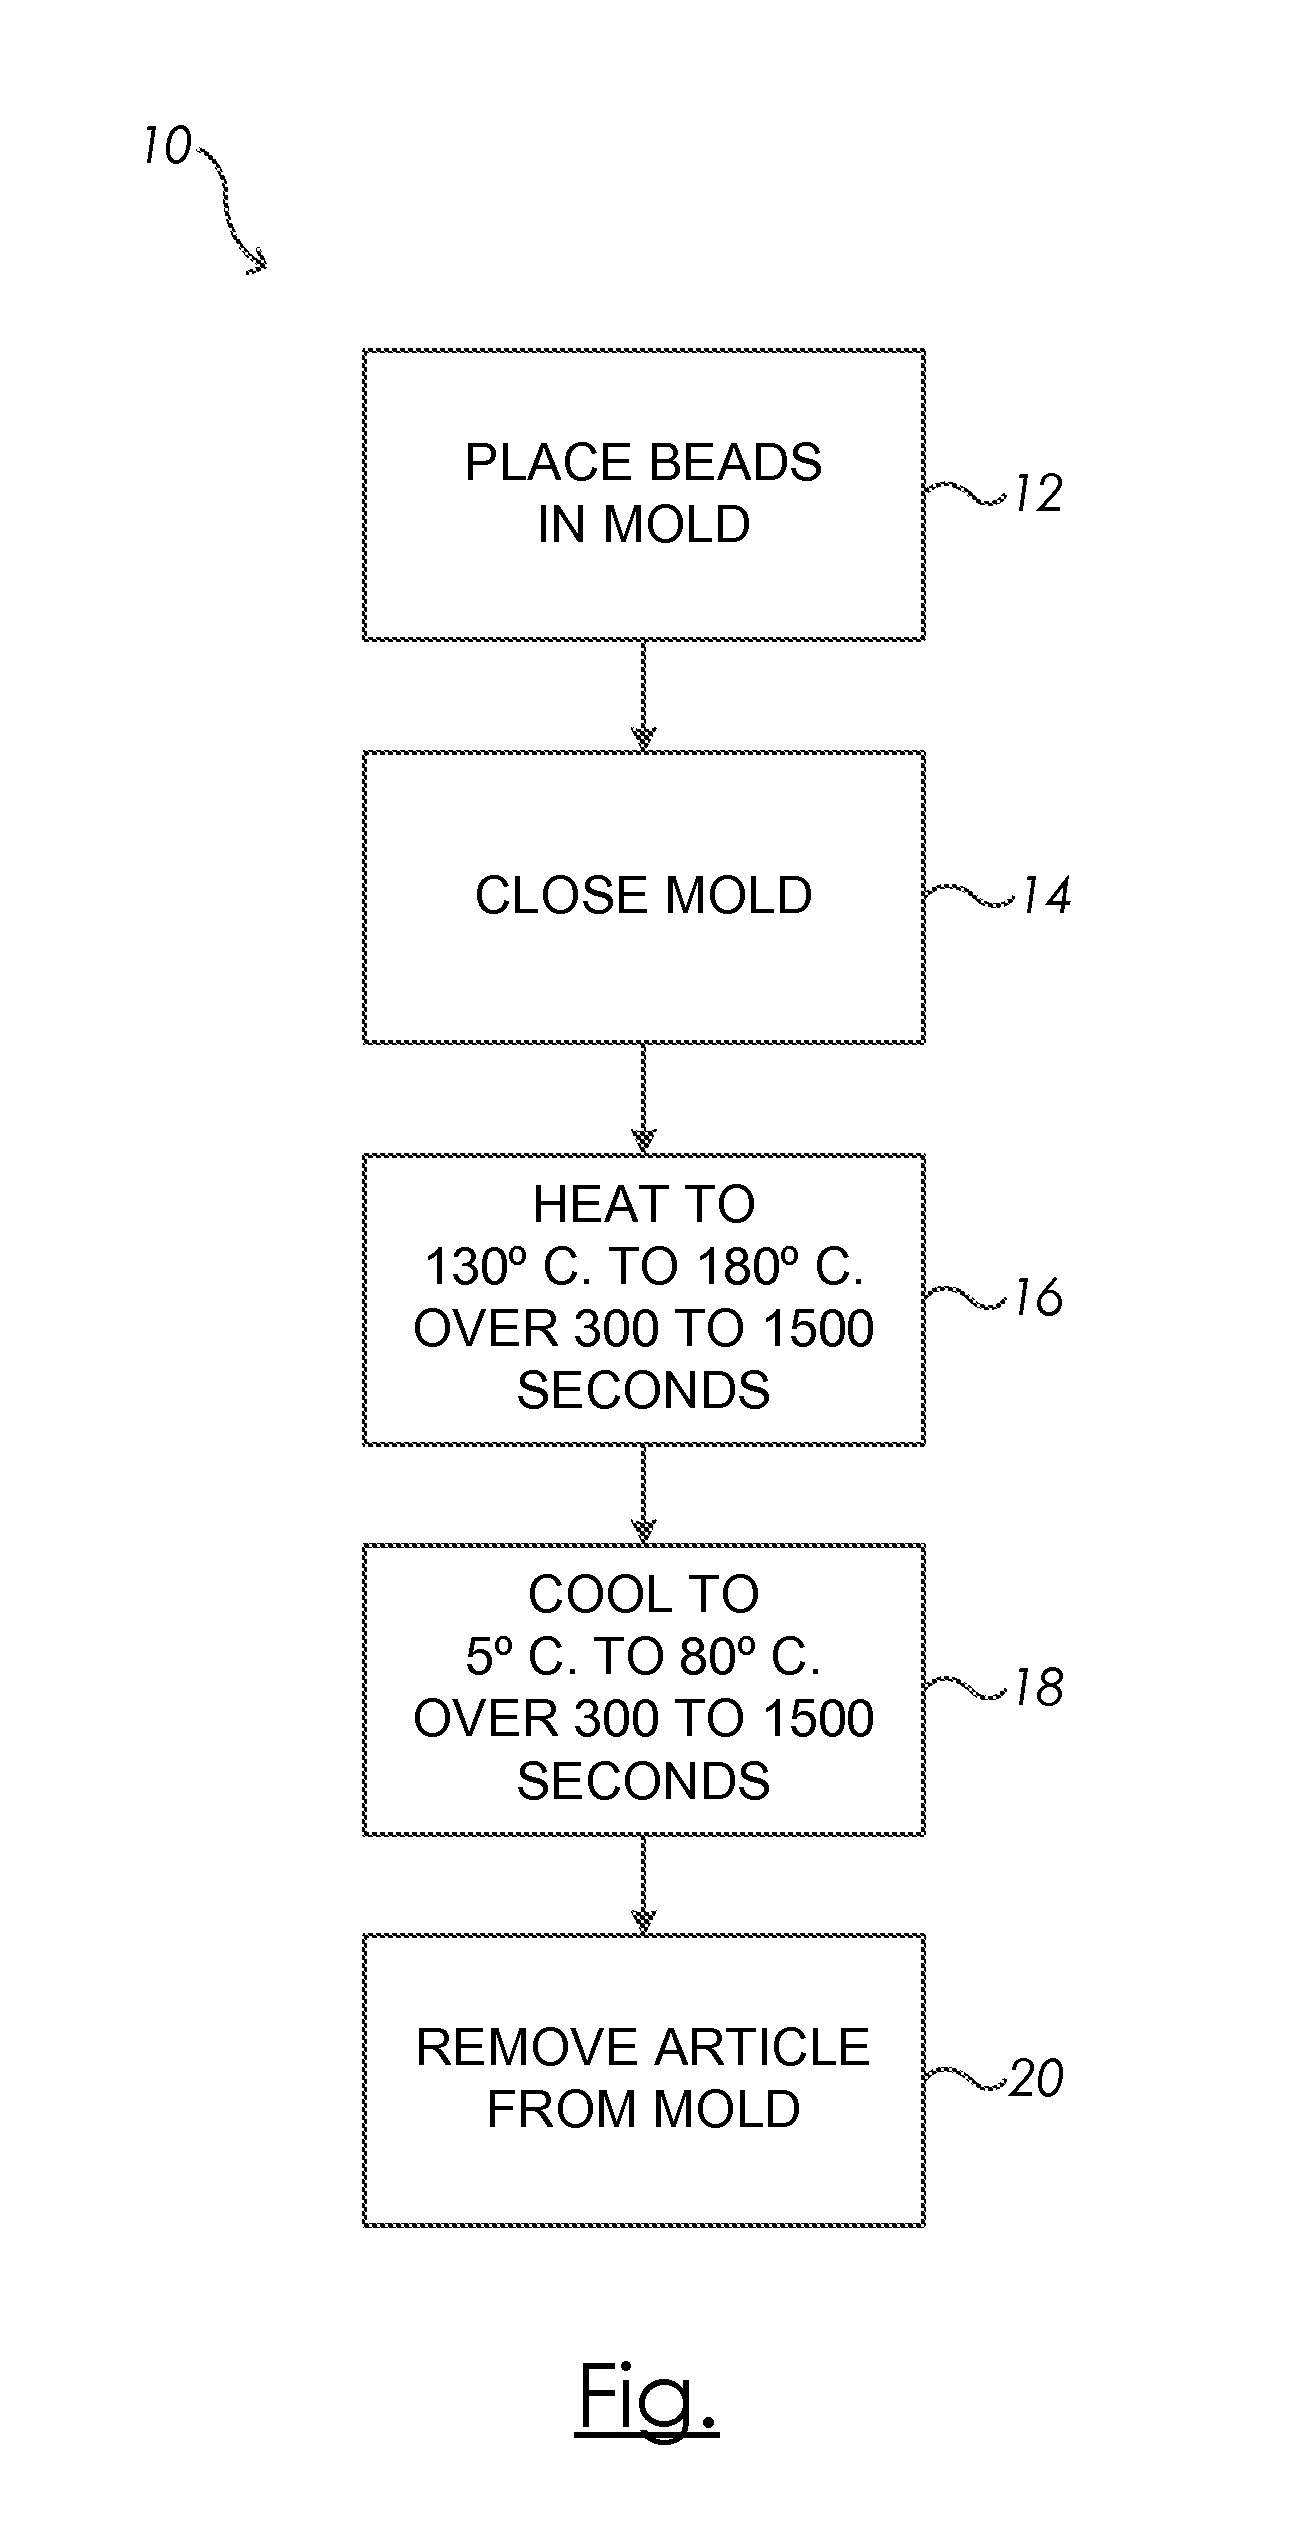 Bead Foam Compression Molding Method for Low Density Product